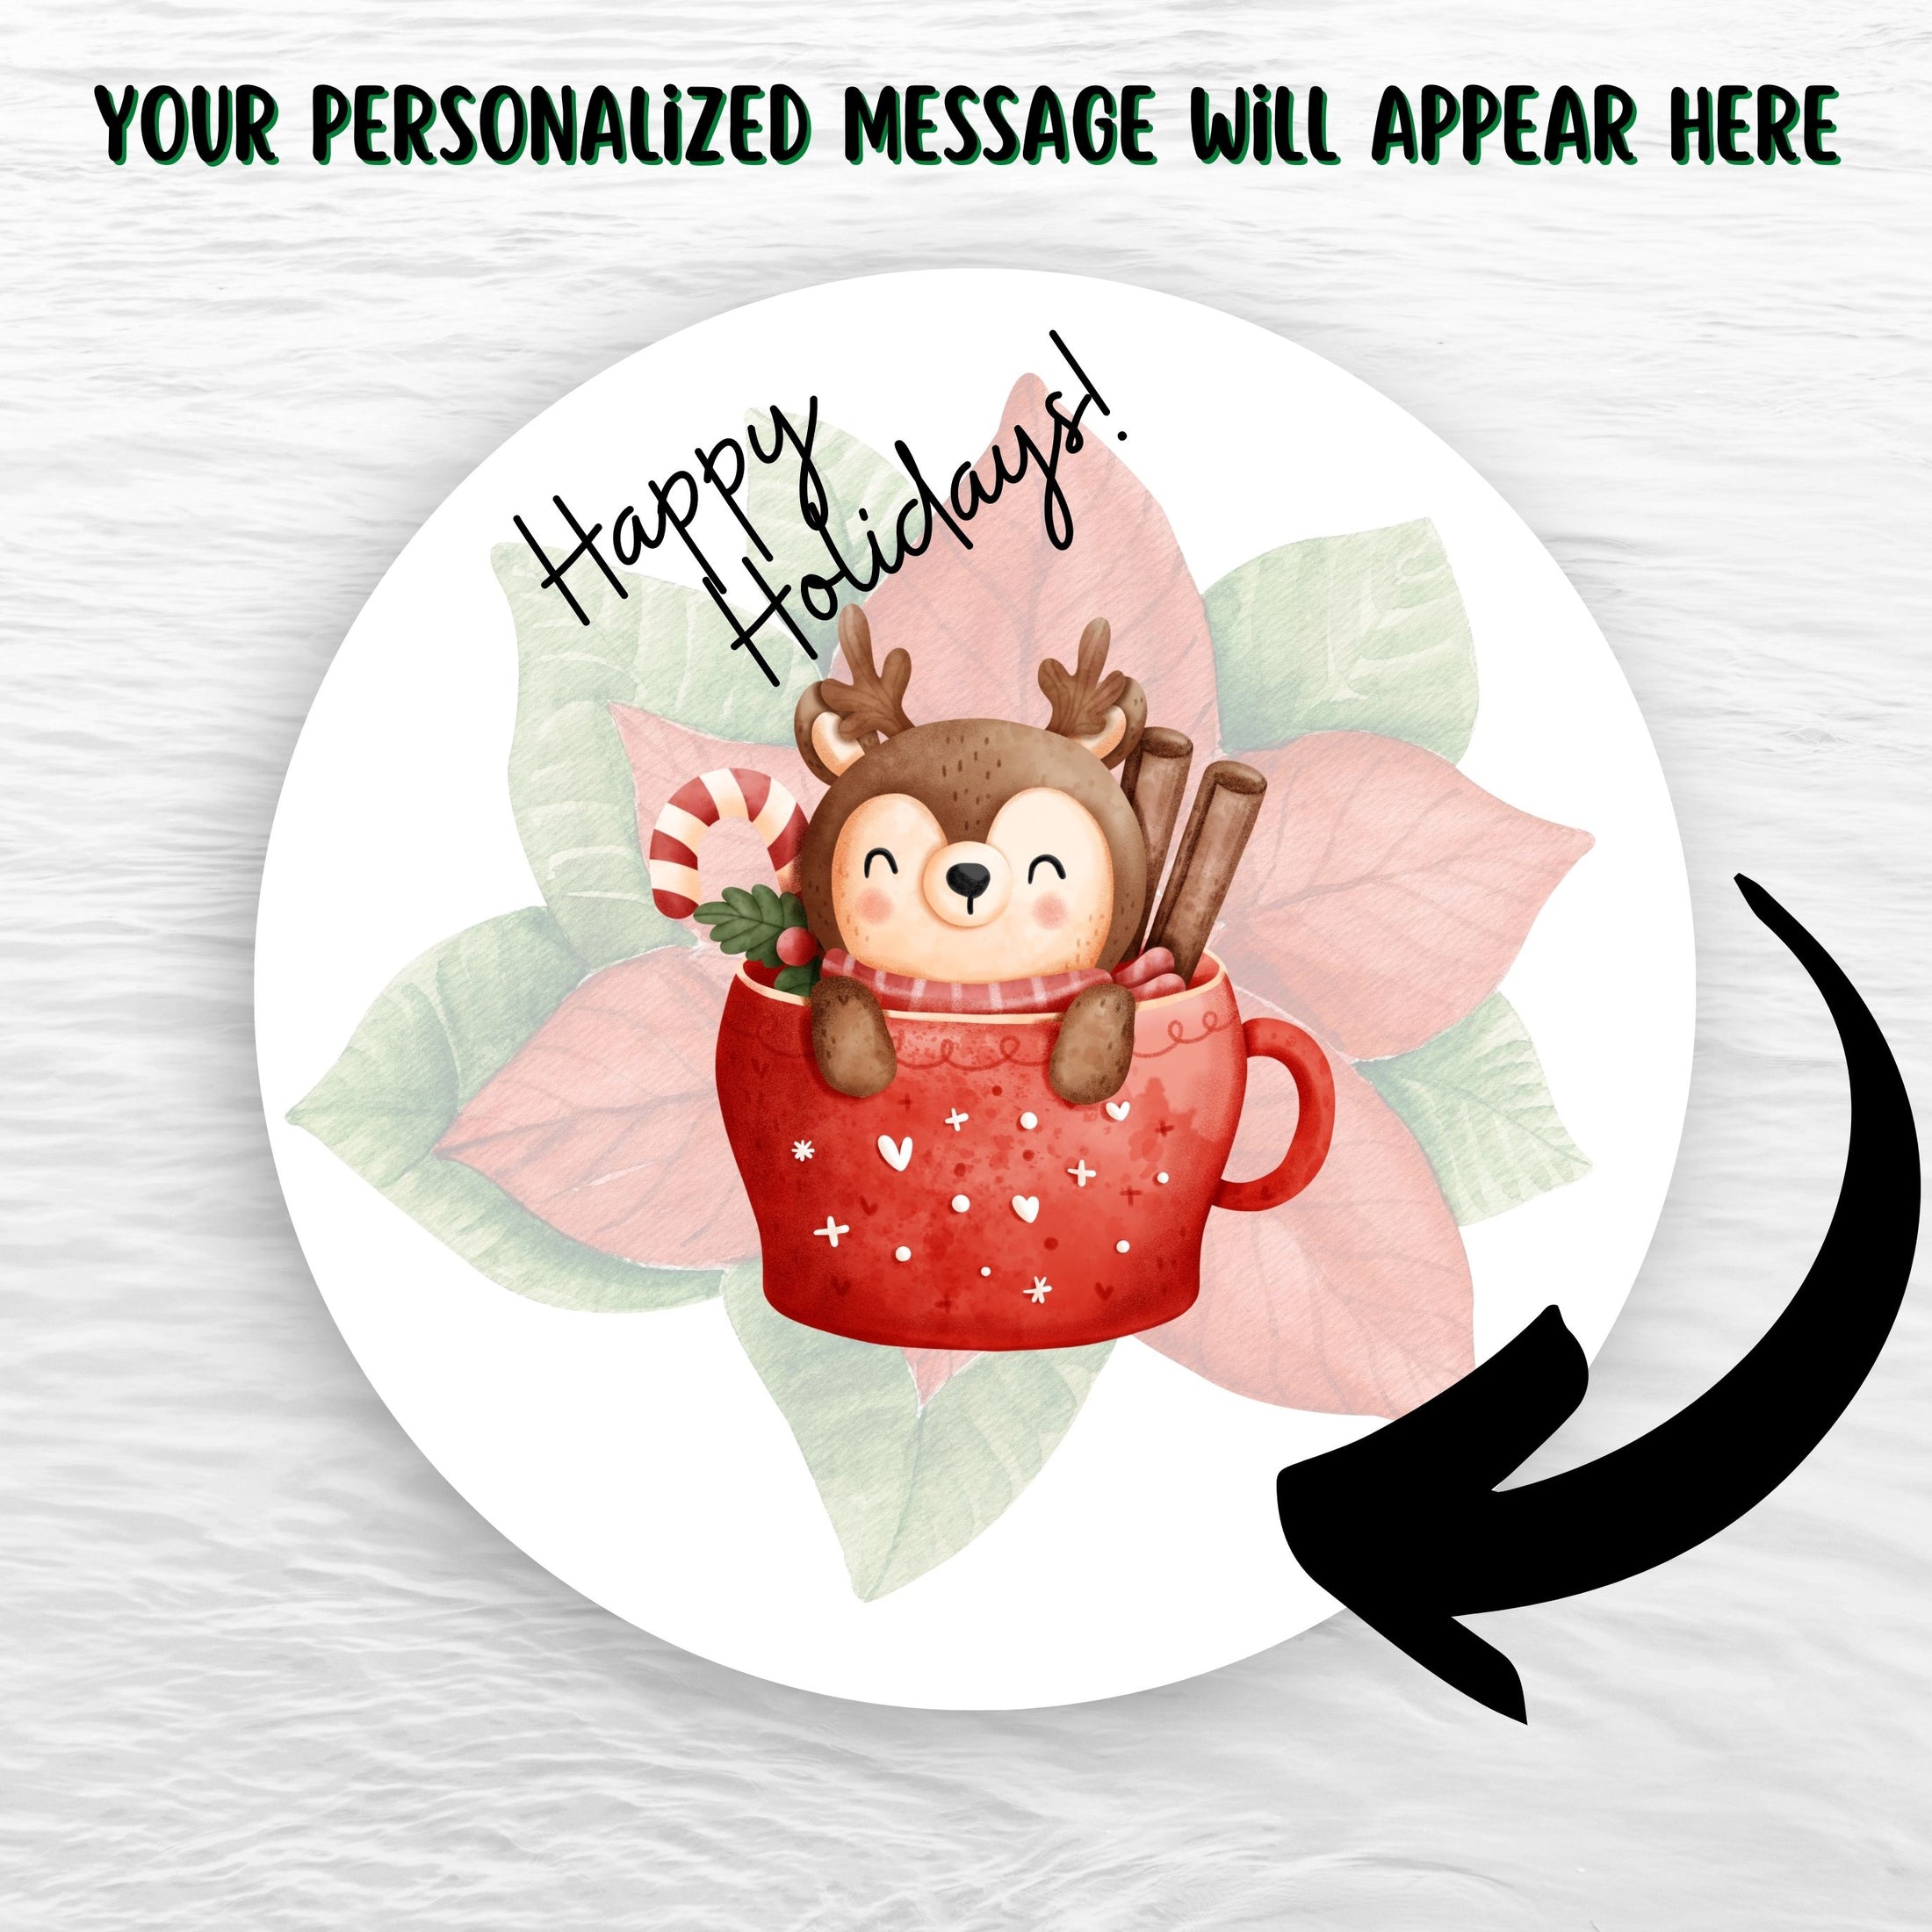 This image shows the holiday sticker with an arrow showing where your personalized message will be printed.